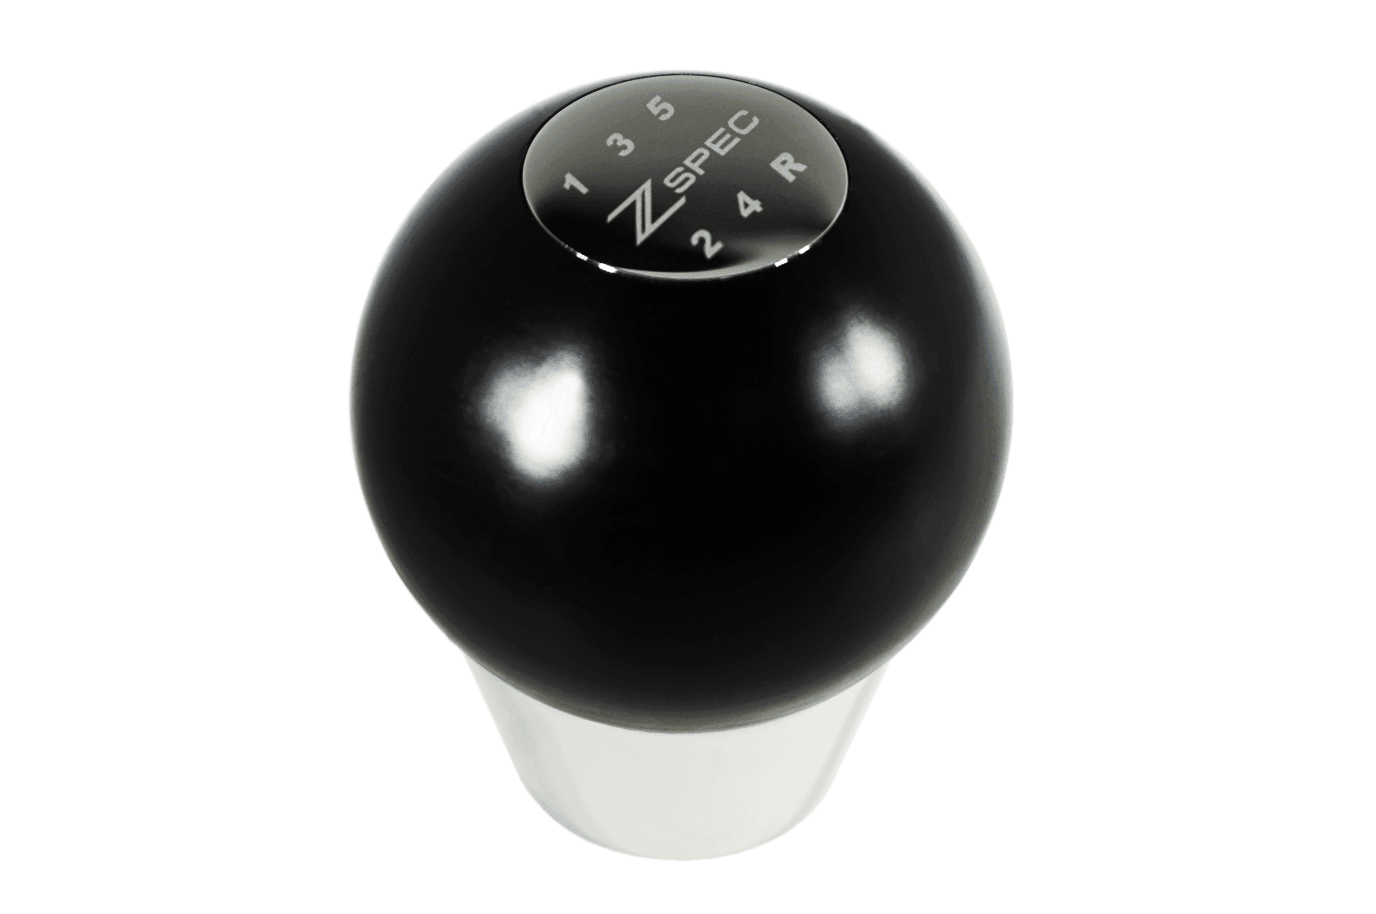 ZSPEC Shift Knob M12-1.25, Delrin & Stainless, 5-Speed Shift Pattern Coin  Interior Performance Upgrade Accessory Dress Up Bolts Fasteners Hardware Matters SUS304 Black Red Blue White Car Auto Vehicle